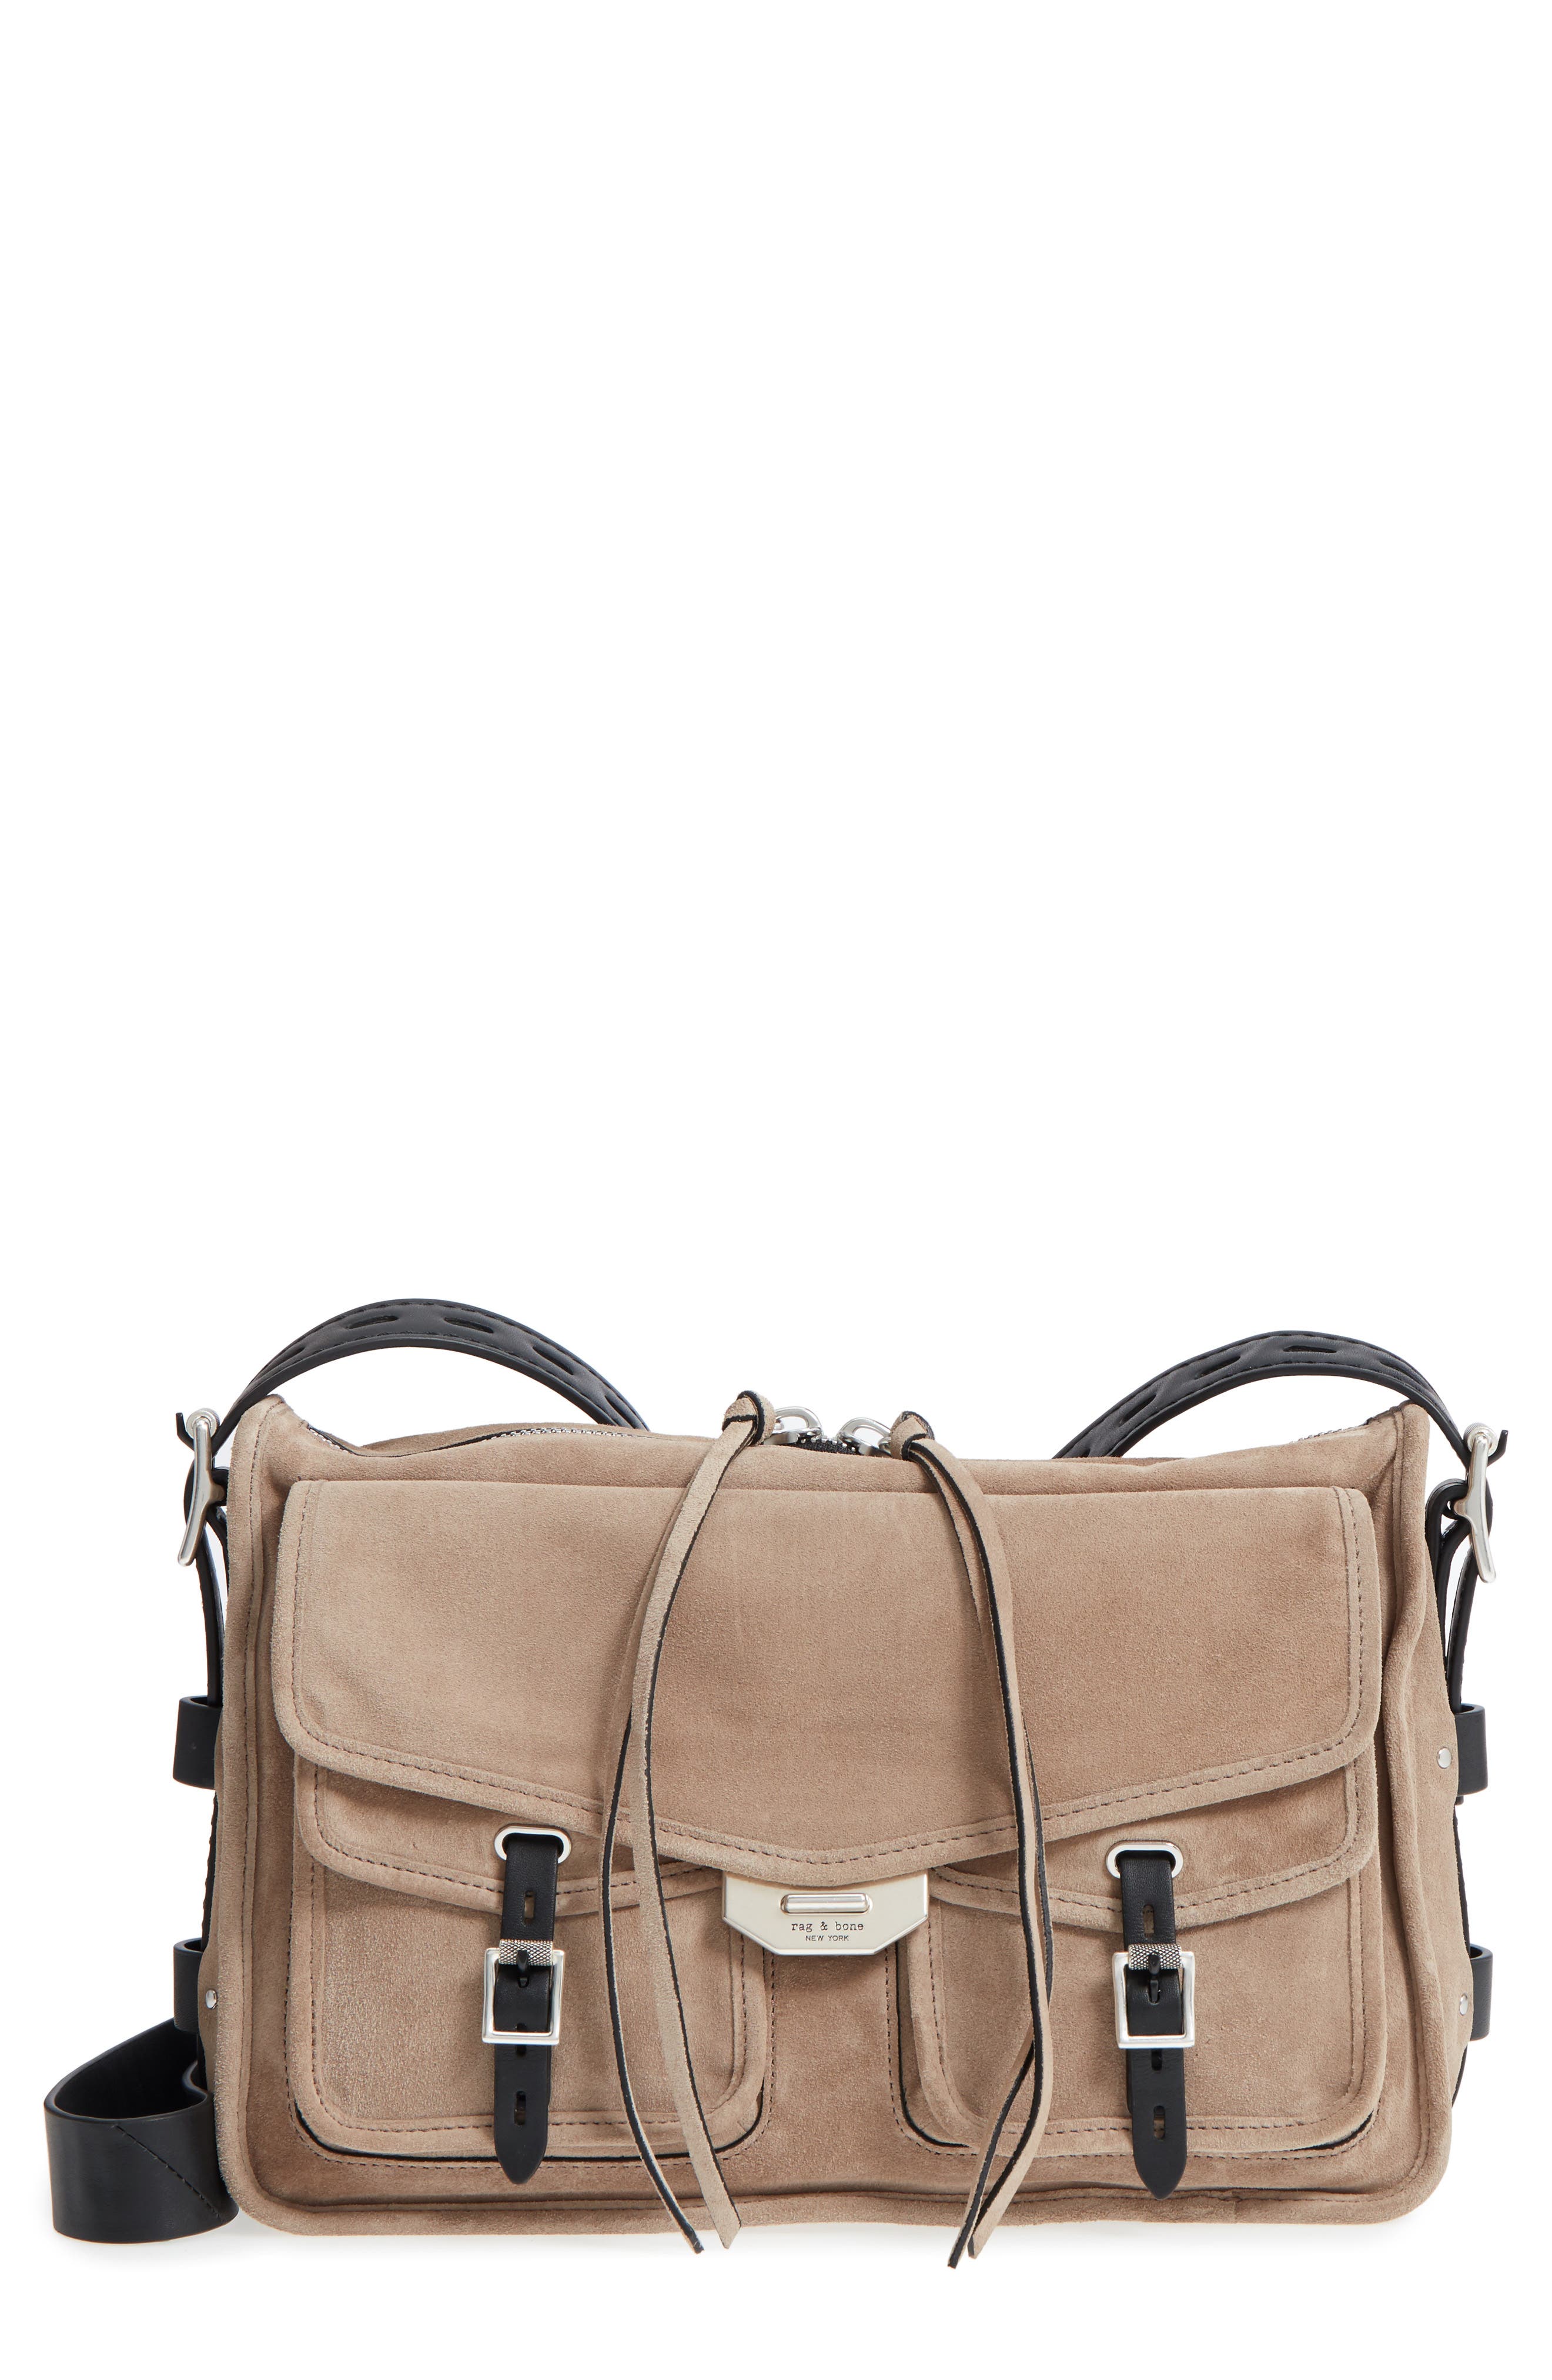 rag and bone field messenger review